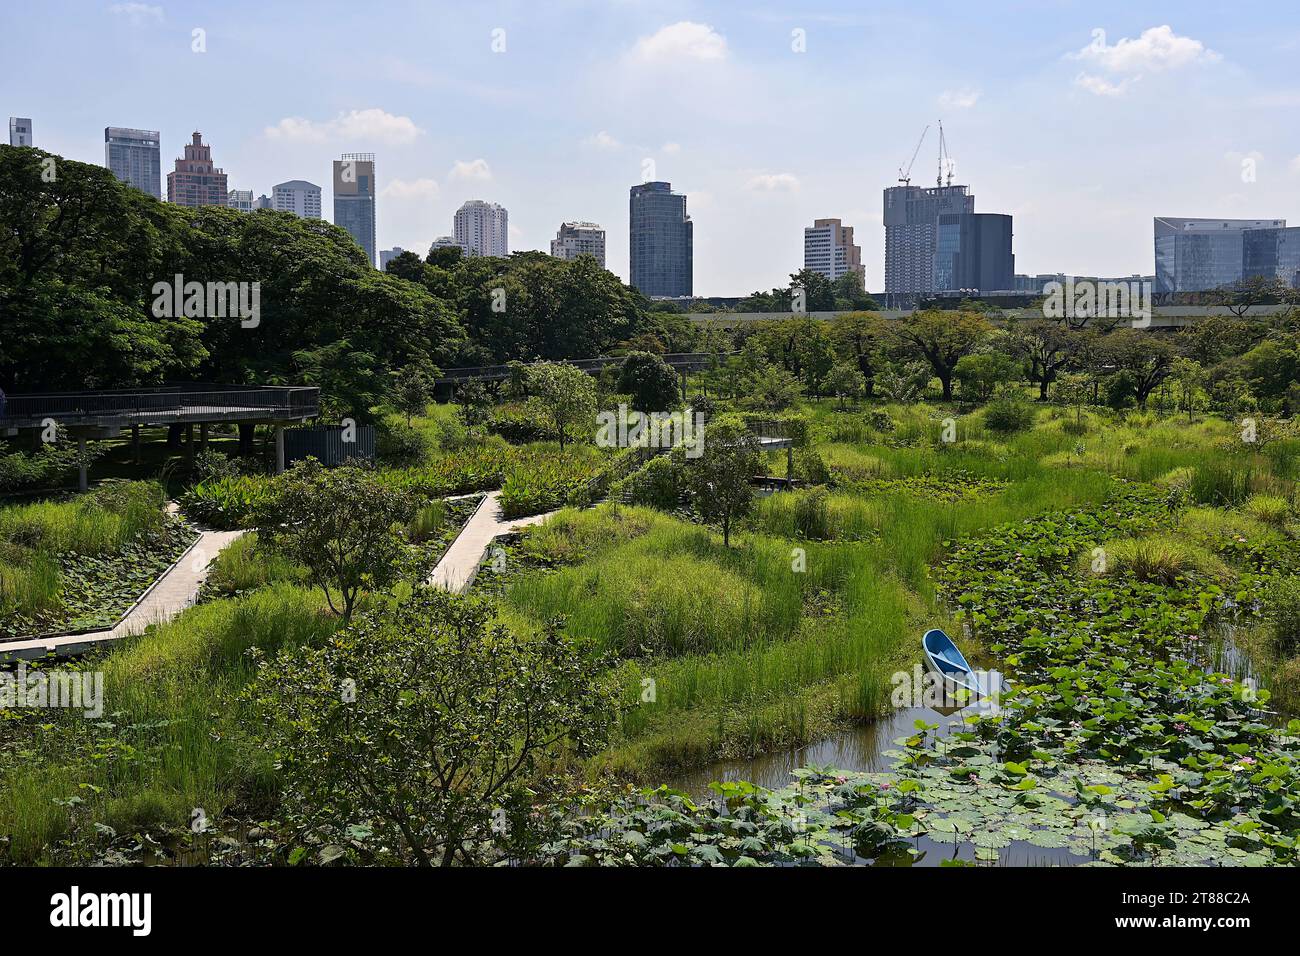 Opened in 2022, the Forest Park is a major expansion to Bangkok's Benjakitti Park, taking over land formerly occupied by the Tobacco Authority of Thai Stock Photo